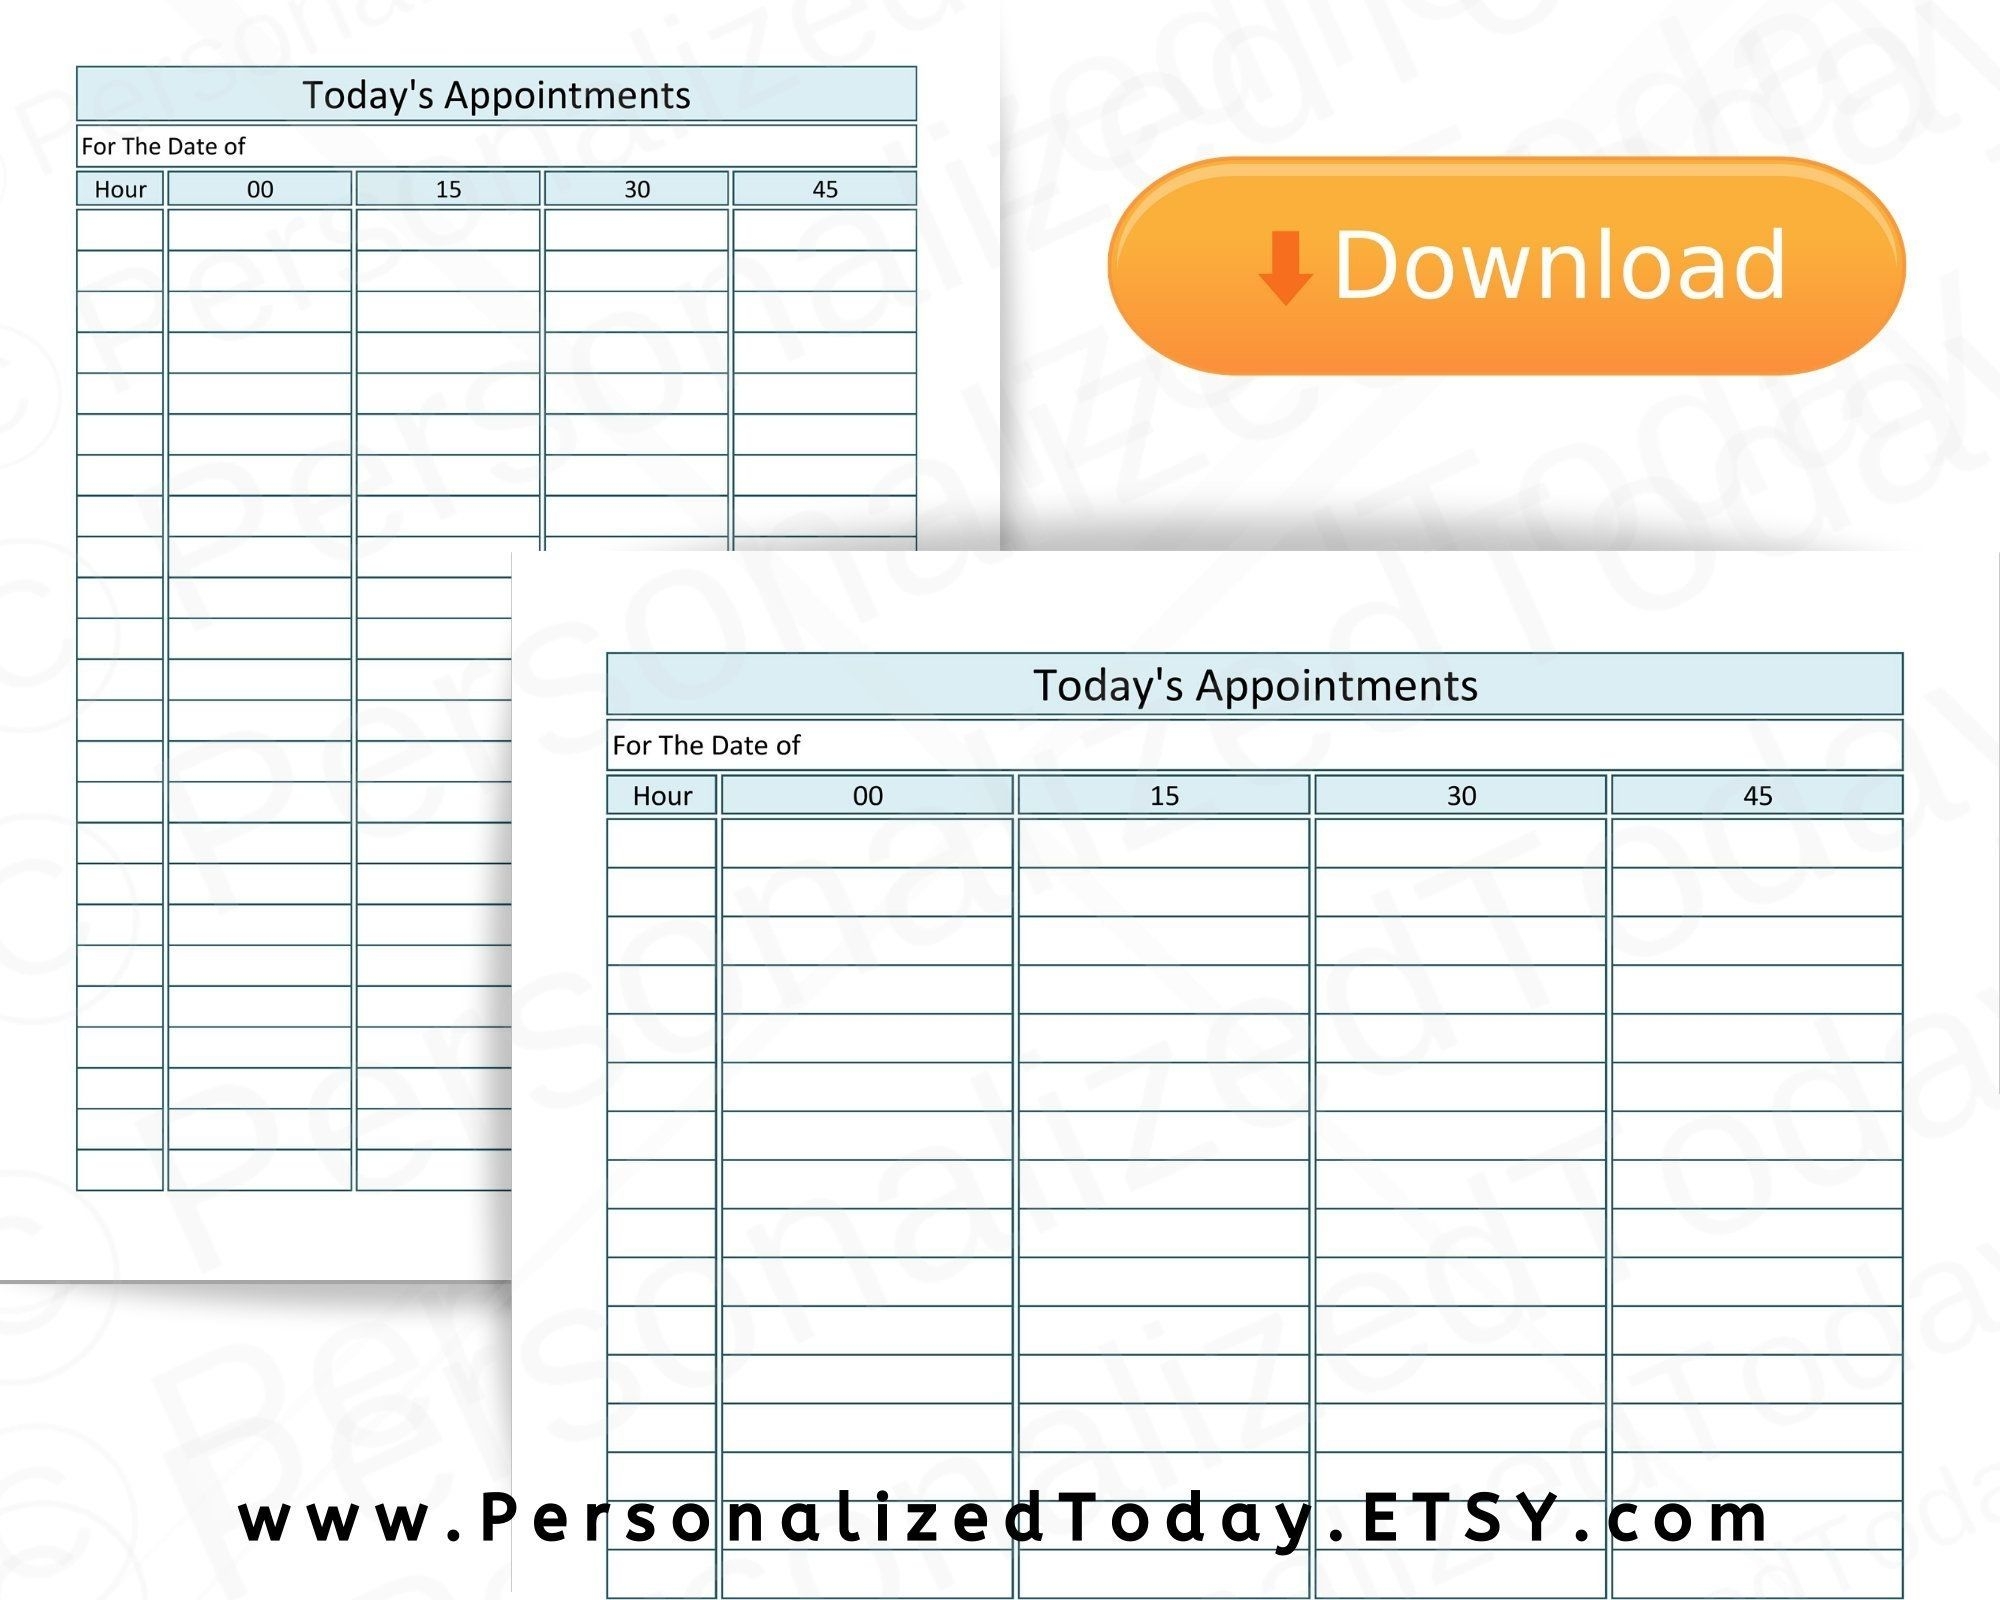 Appointment Calendar 15 Minute Increments Free | Ten Free